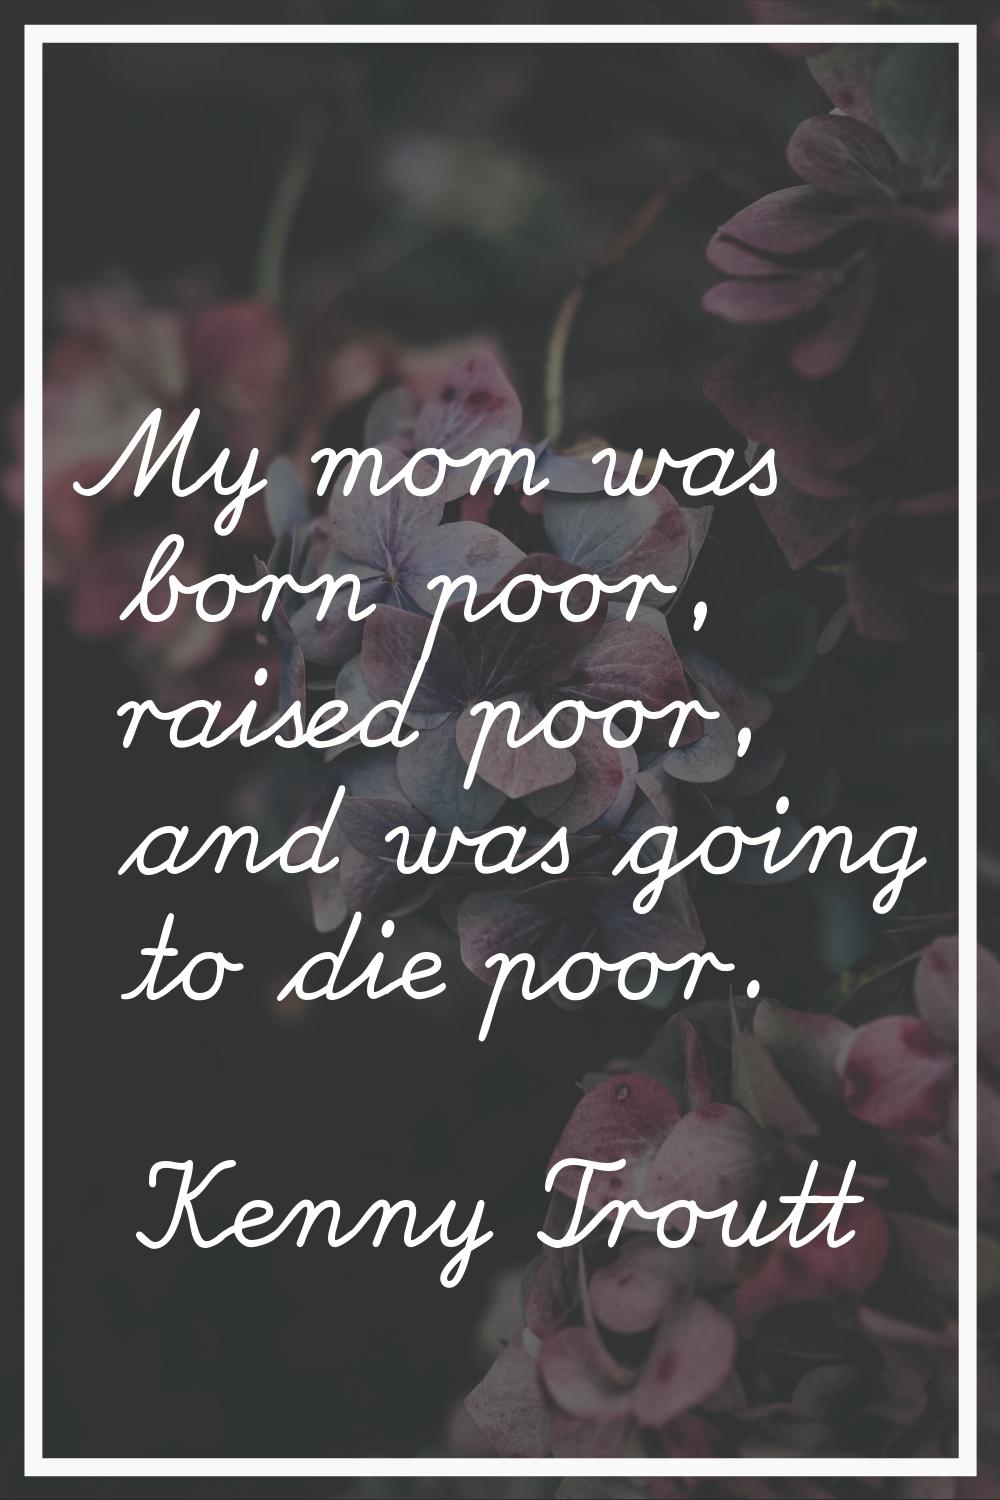 My mom was born poor, raised poor, and was going to die poor.